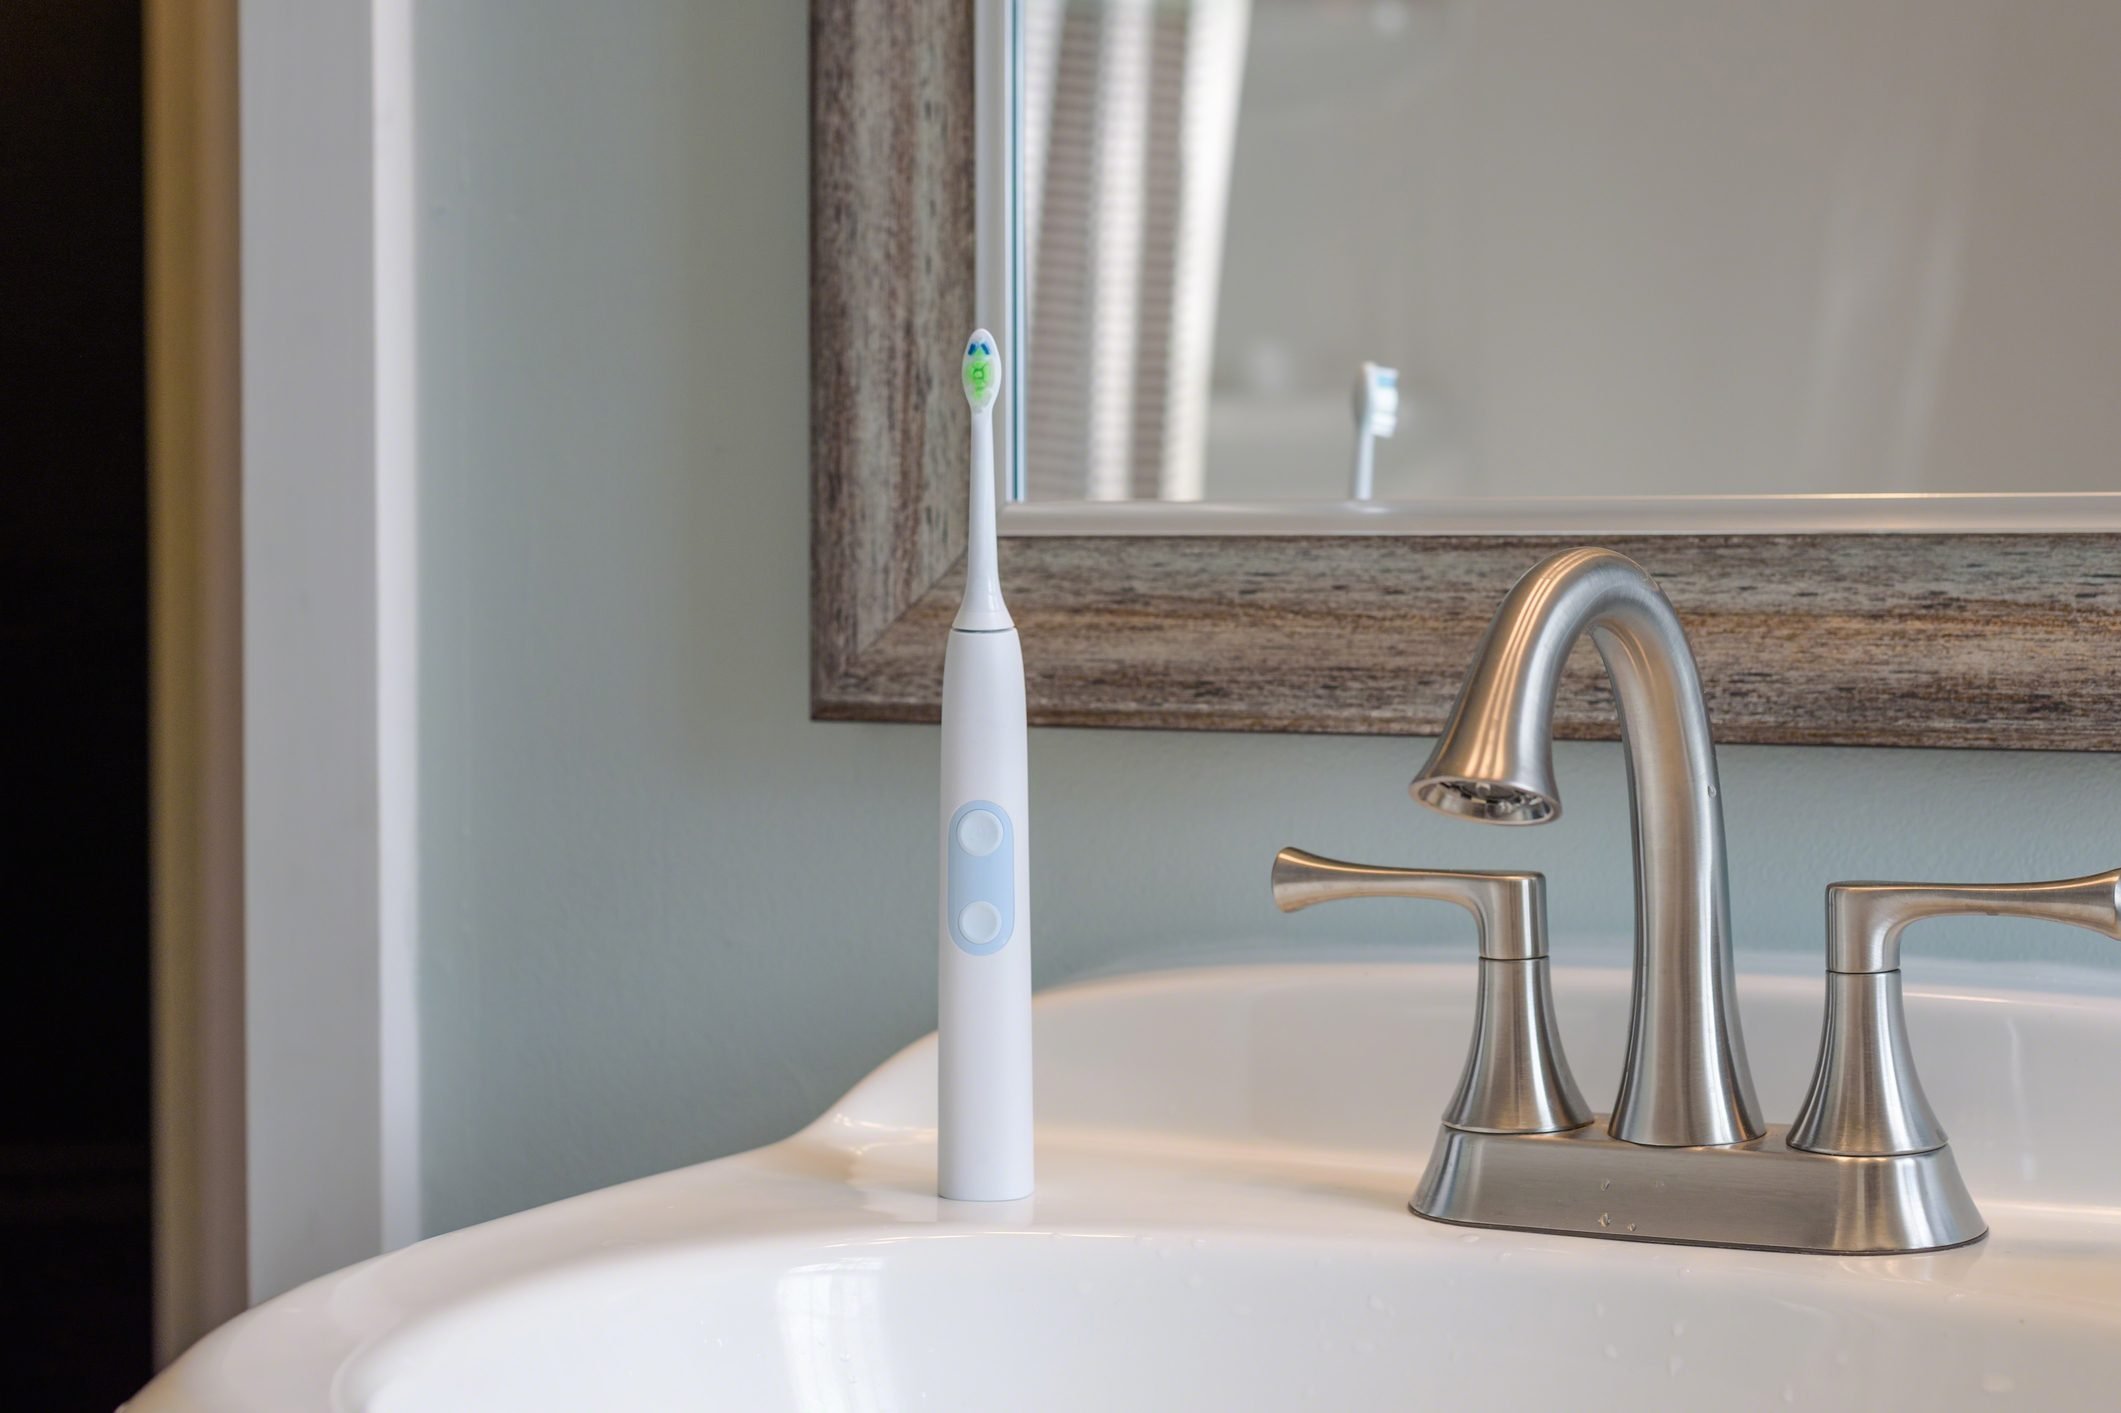 electric toothbrush in bathroom